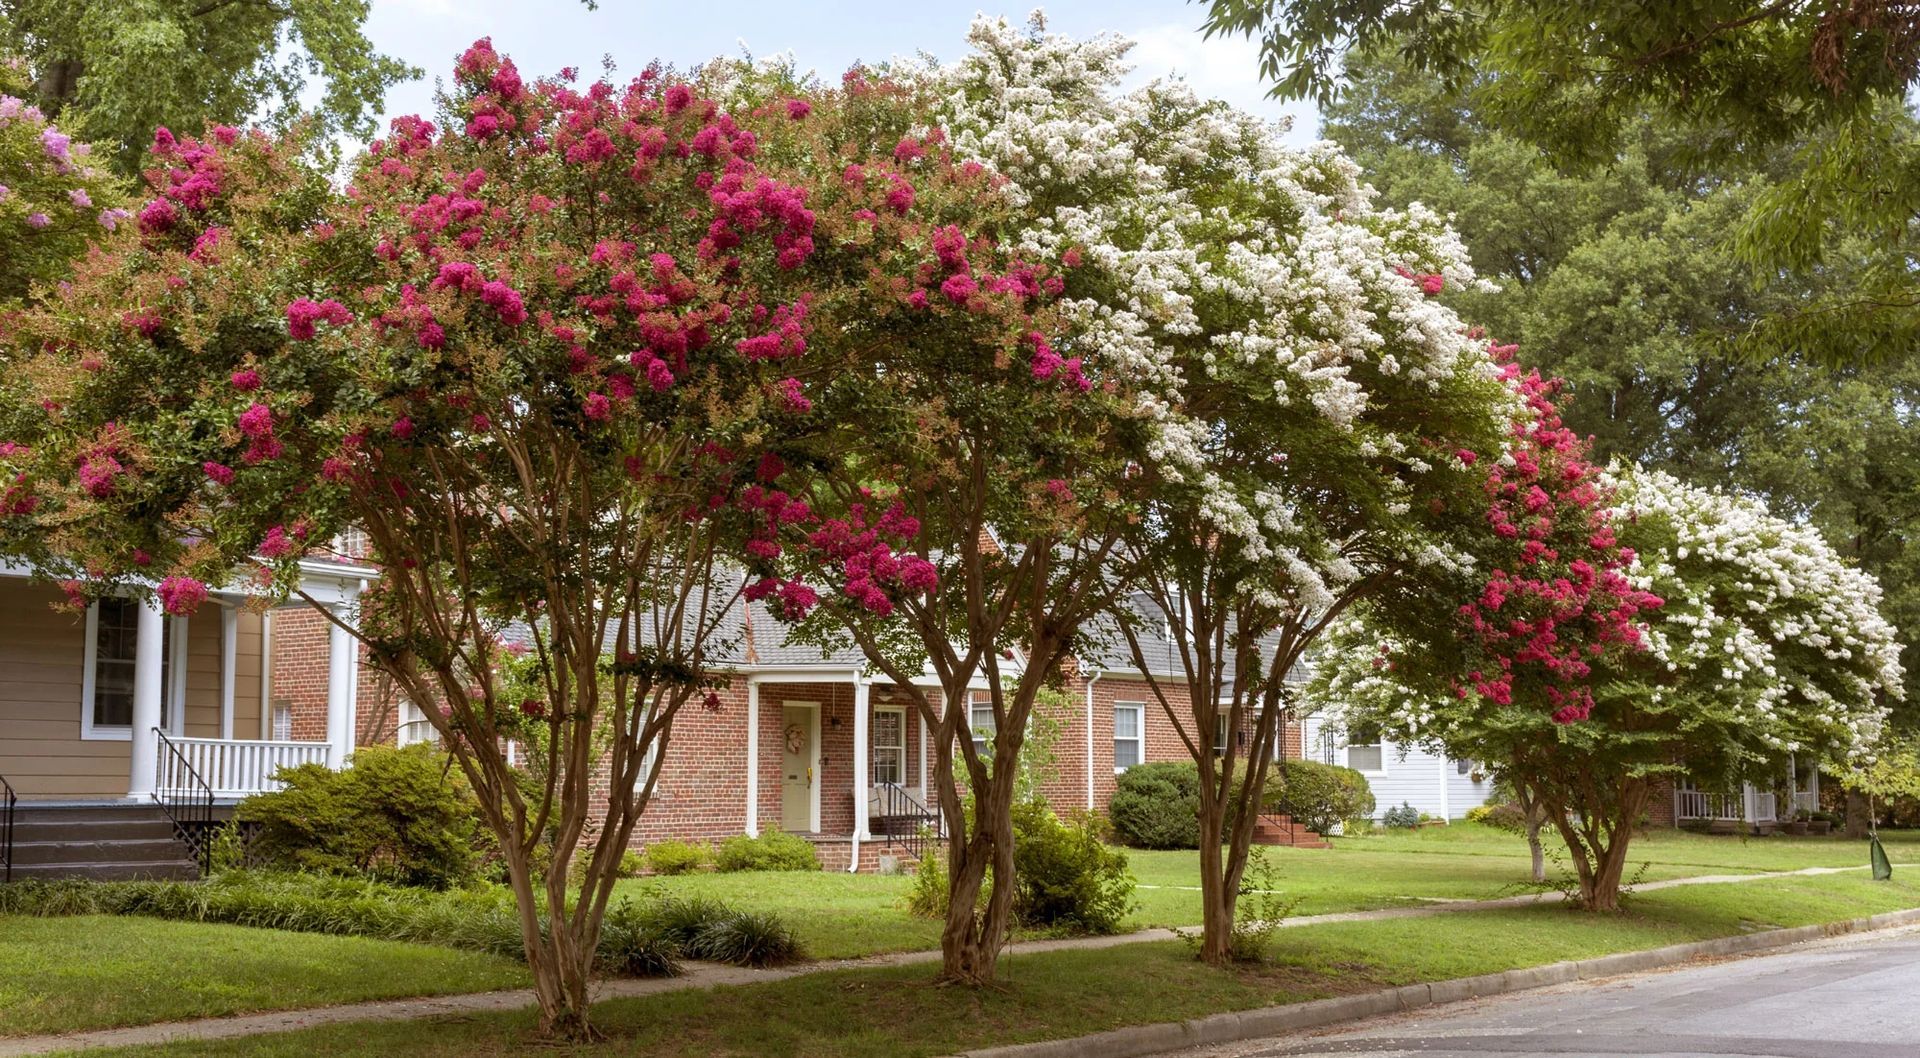 This picture shows 3 beautiful crape myrtles in full bloom that have been selectively topped throughout many years resulting in a beautiful growth pattern.